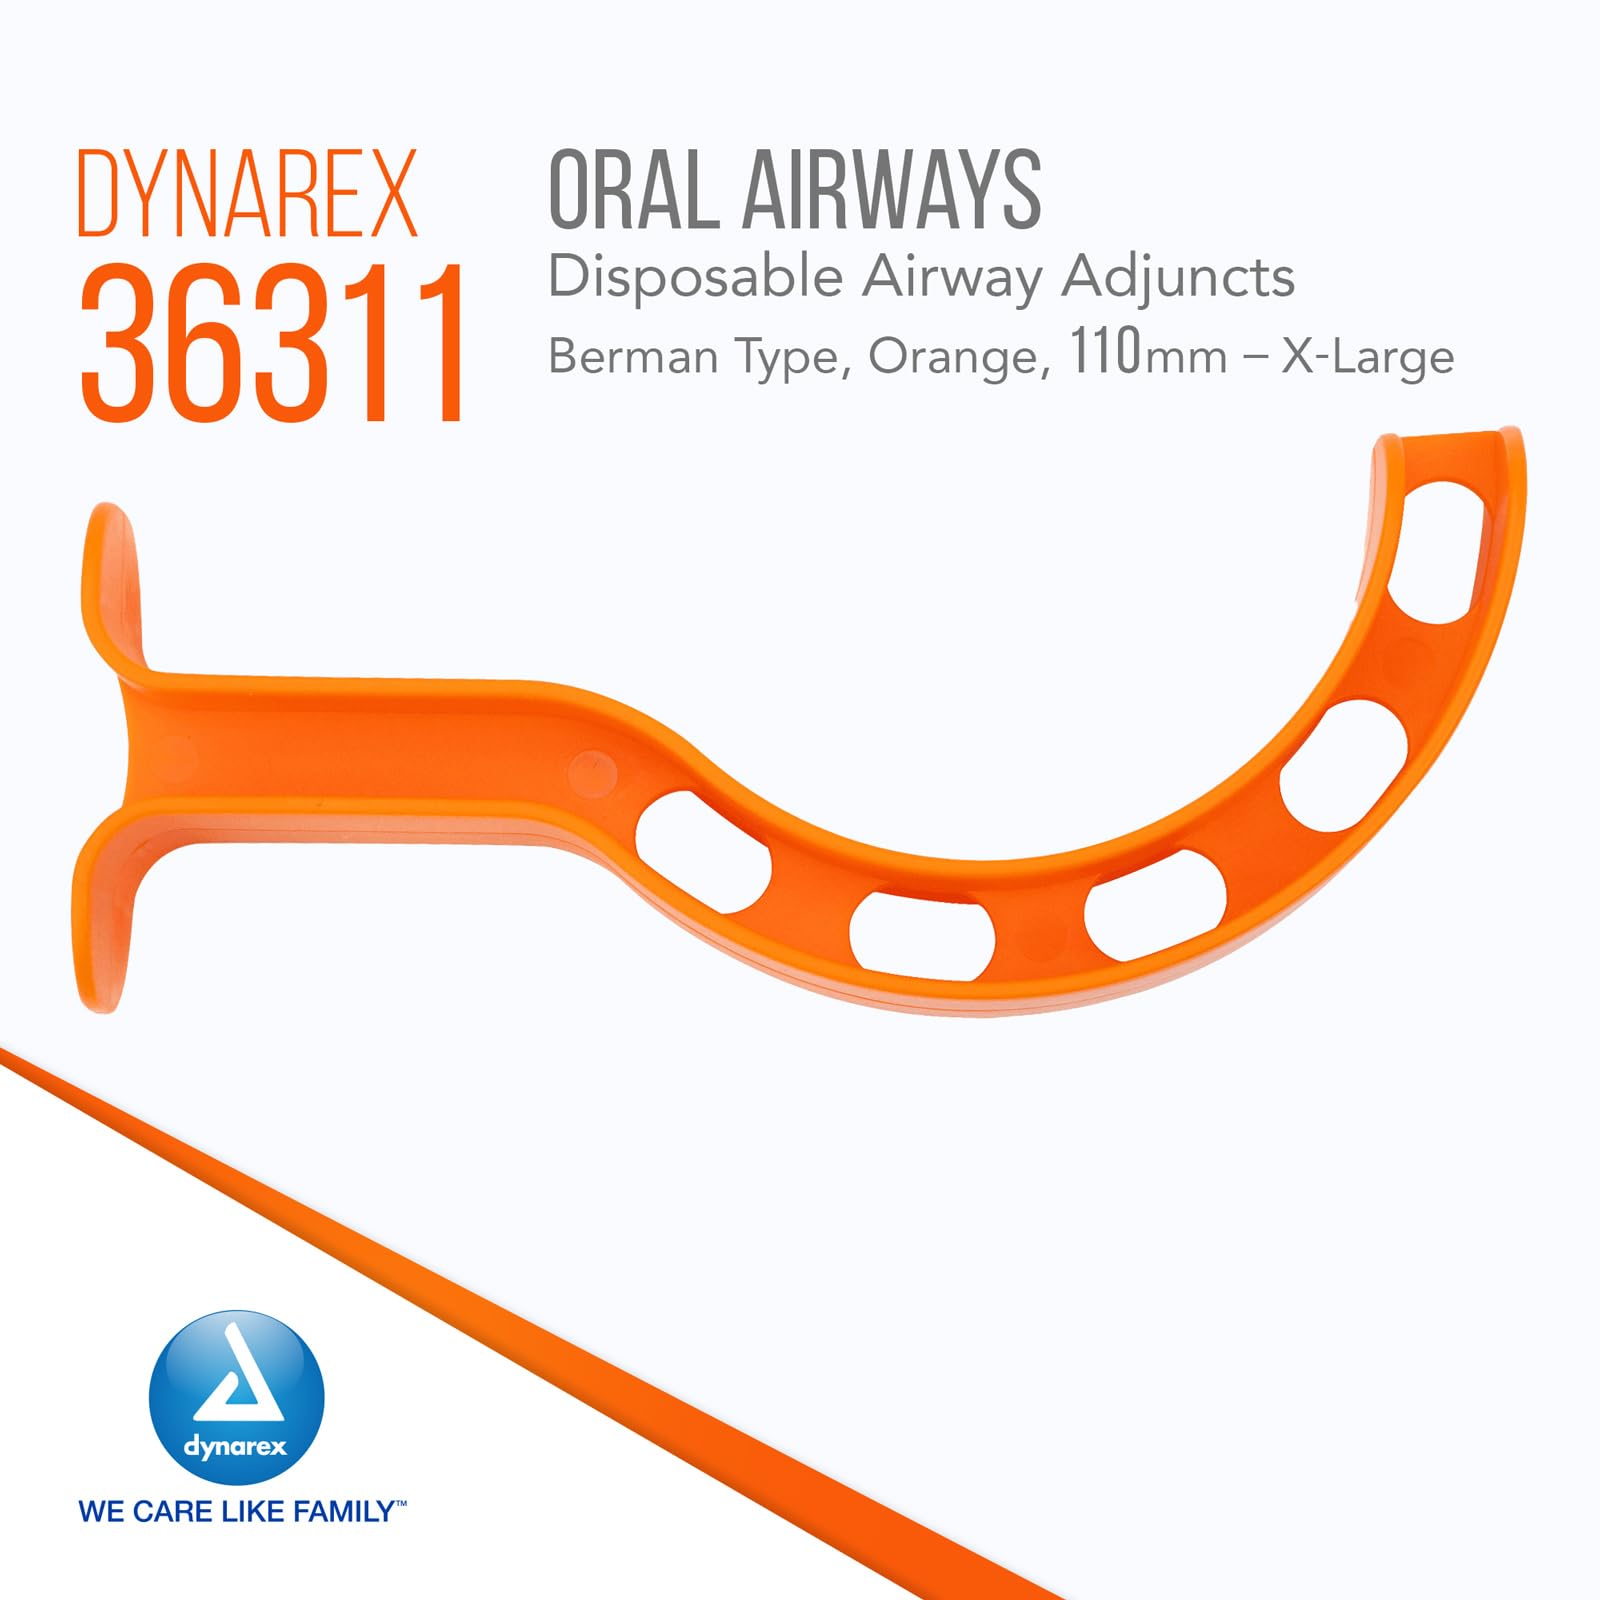 Dynarex Berman Oral Airway Assist Device - Disposable Airway Adjuncts - Slotted Sides, Midway Opening, Color-Coded Bite Lock - 110mm Adult, 24-Count